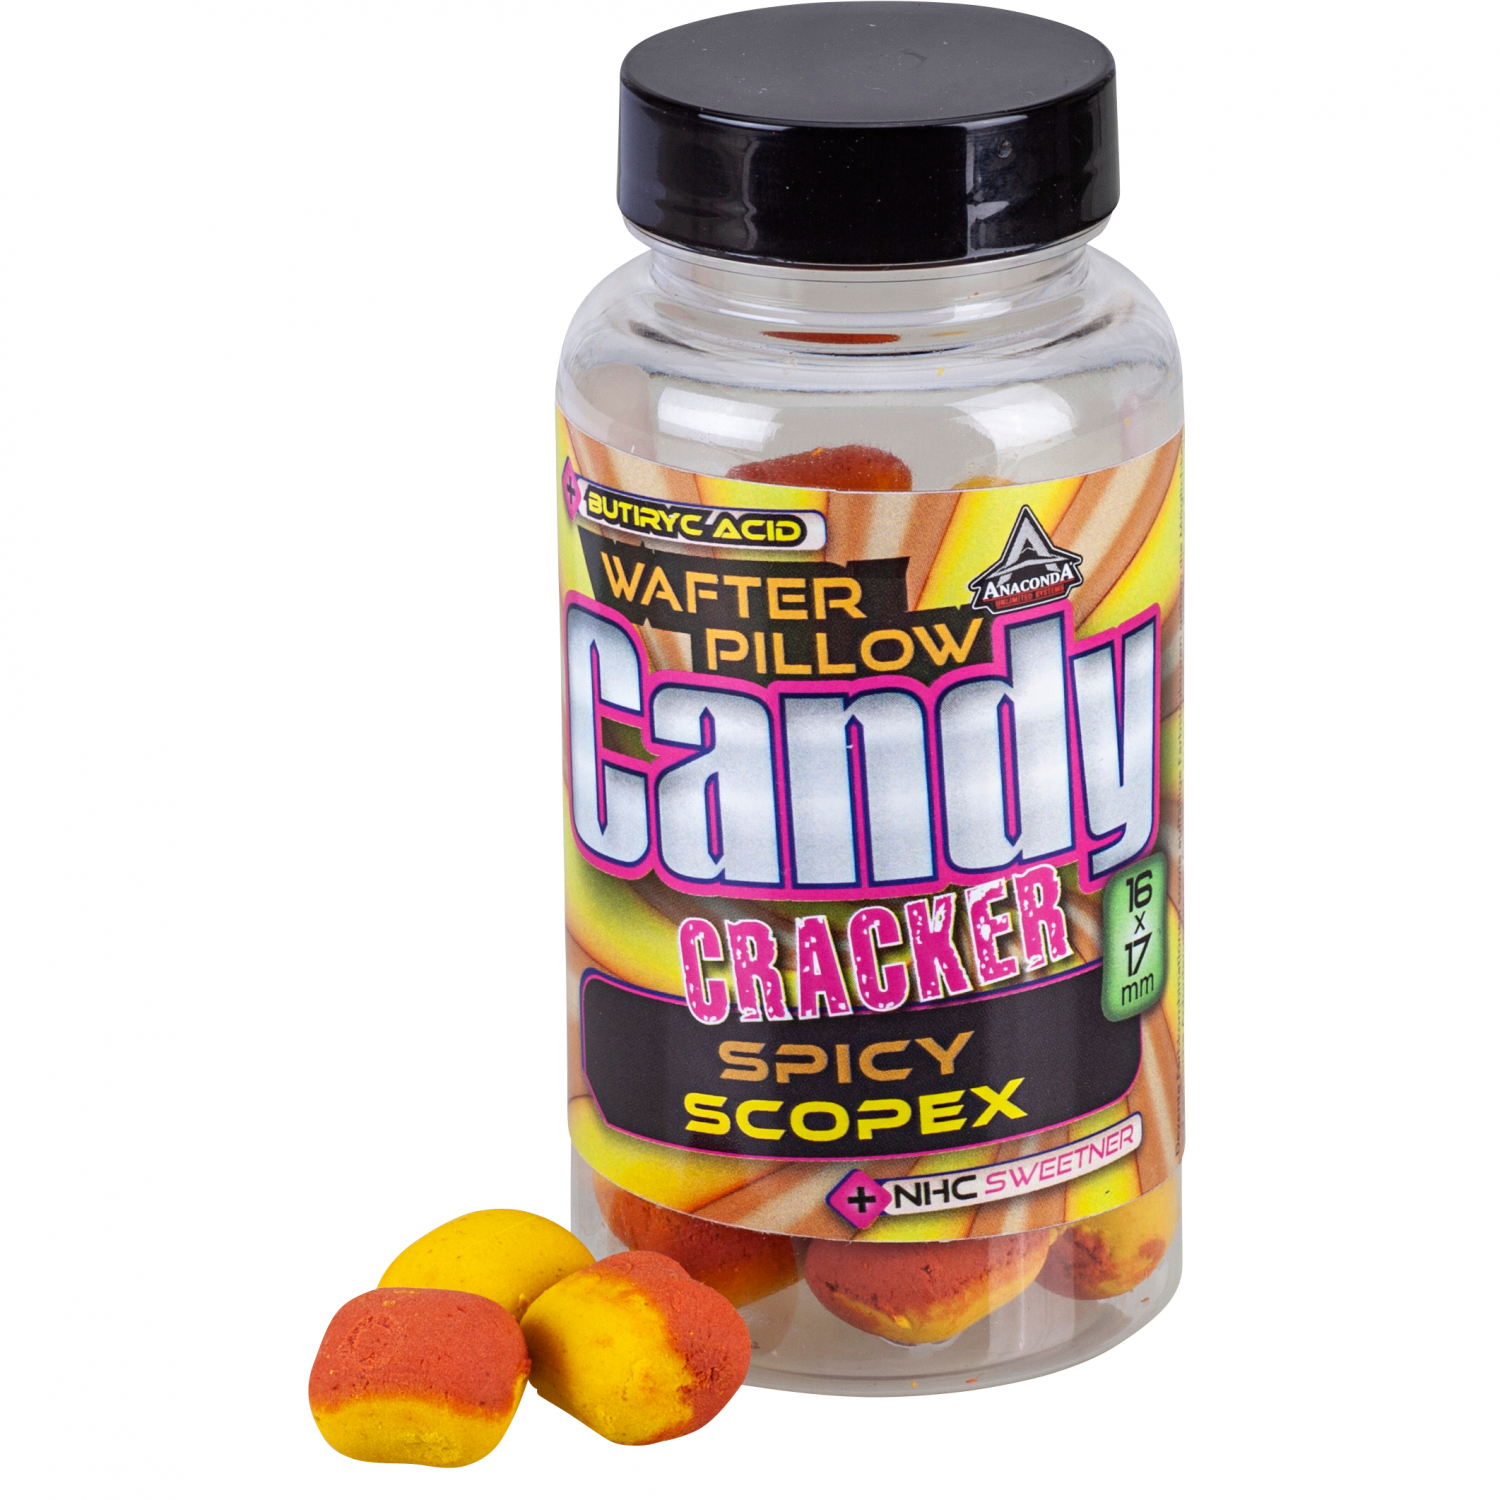 Anaconda Candy Cracker Wafter Pillow (Spicy/Scopex) 